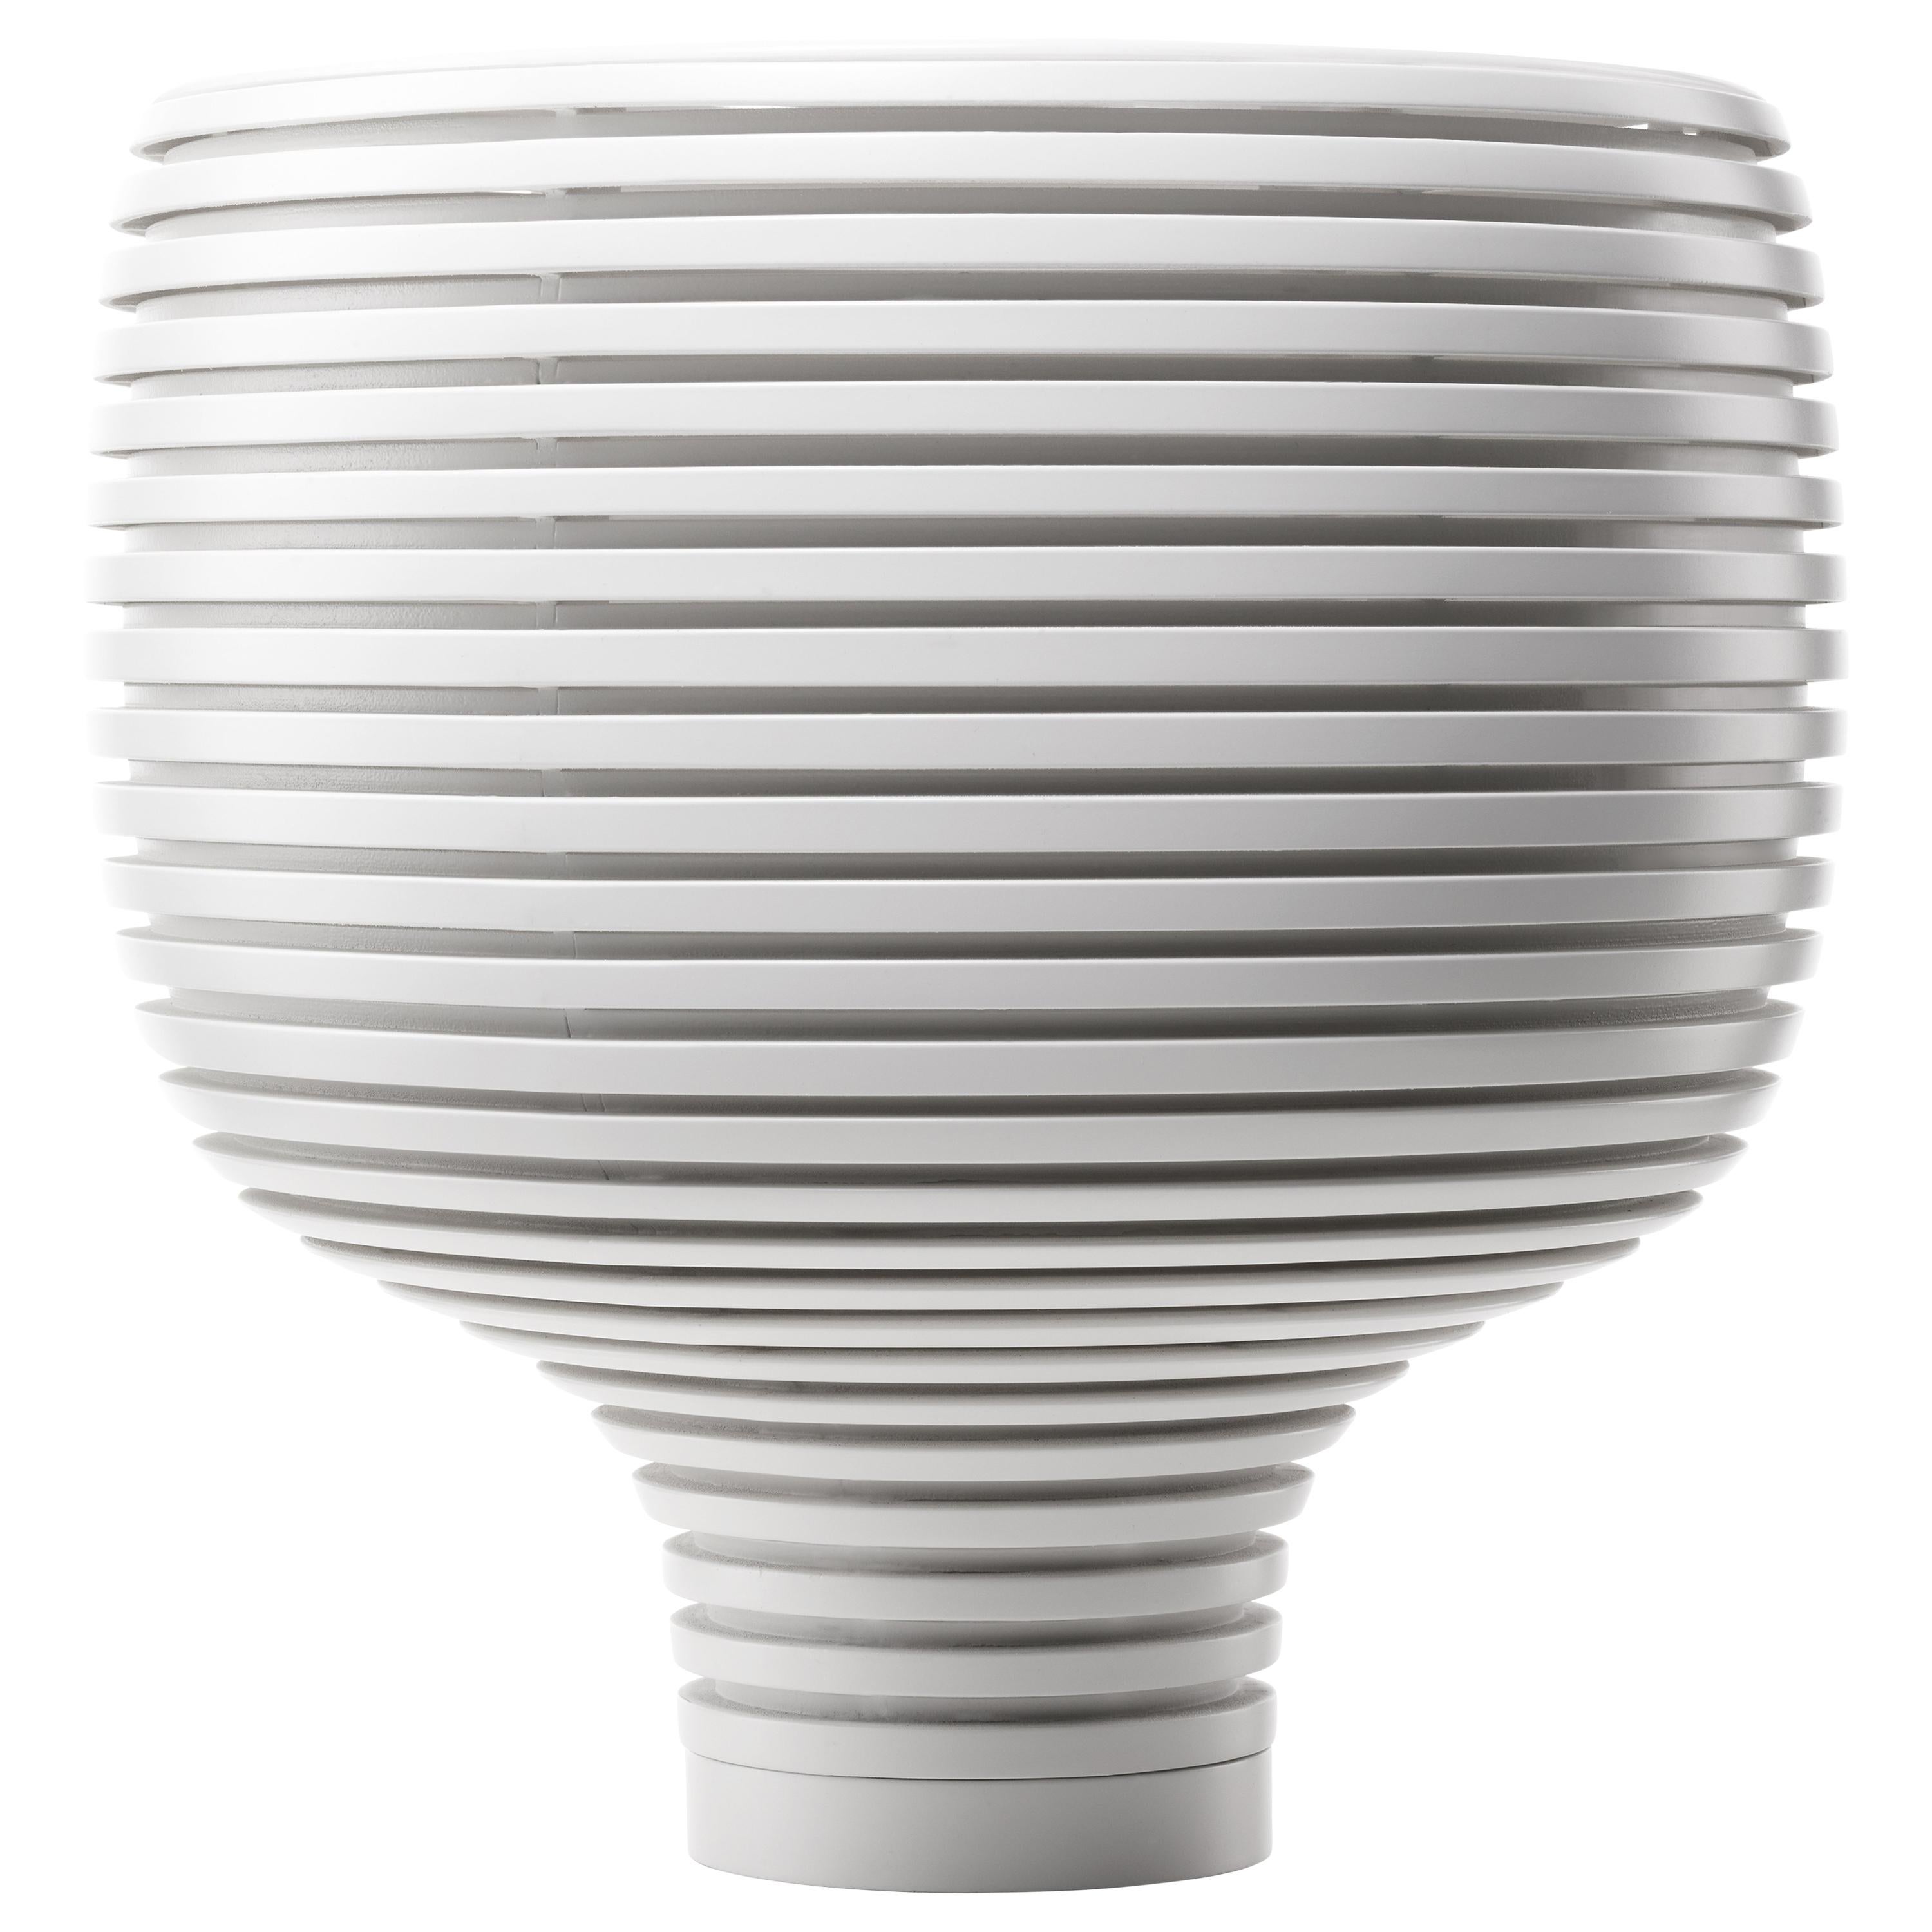 Foscarini Behive Table Lamp in White by Werner Aisslinger